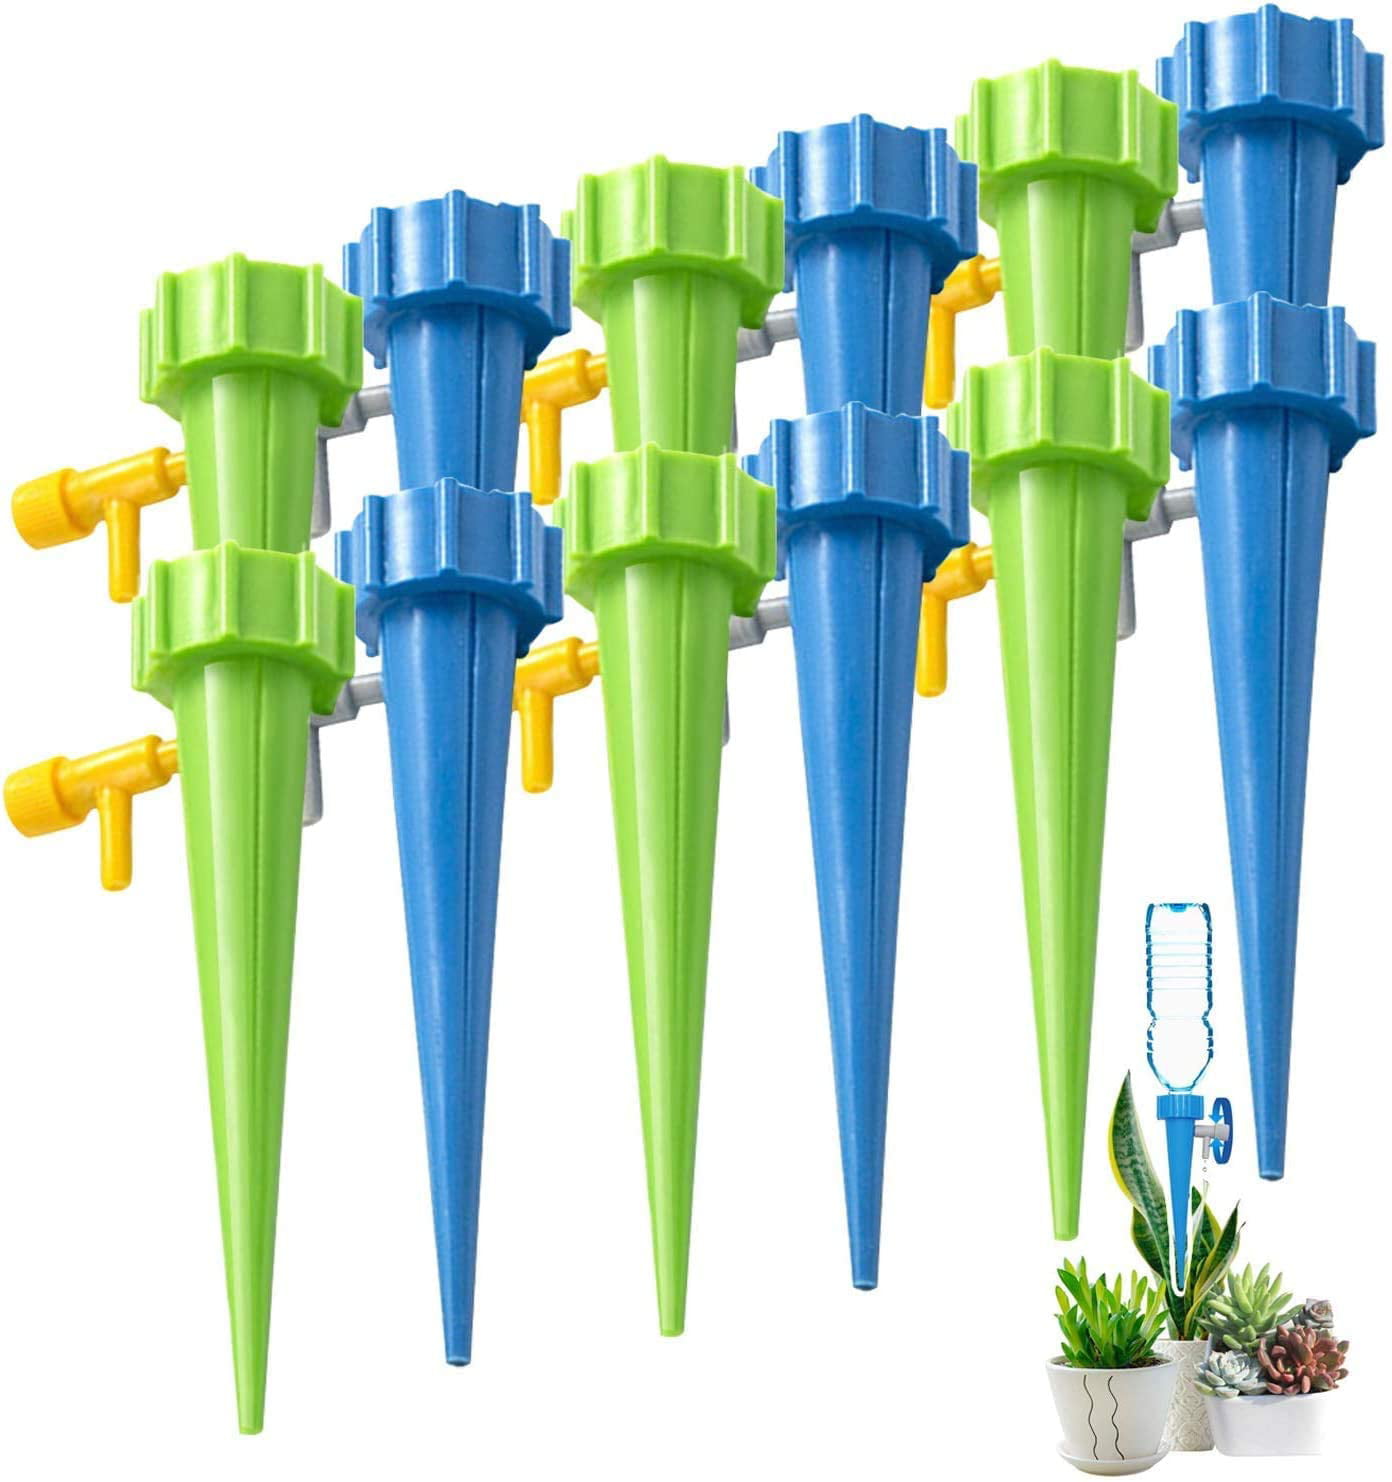 18 PCS Automatic Self Watering Spikes for Outdoor Indoor Plants,Adjustable Plant Self Watering Spikes for Garden,Plant Watering Devices with Slow Release Control Valve Switch 